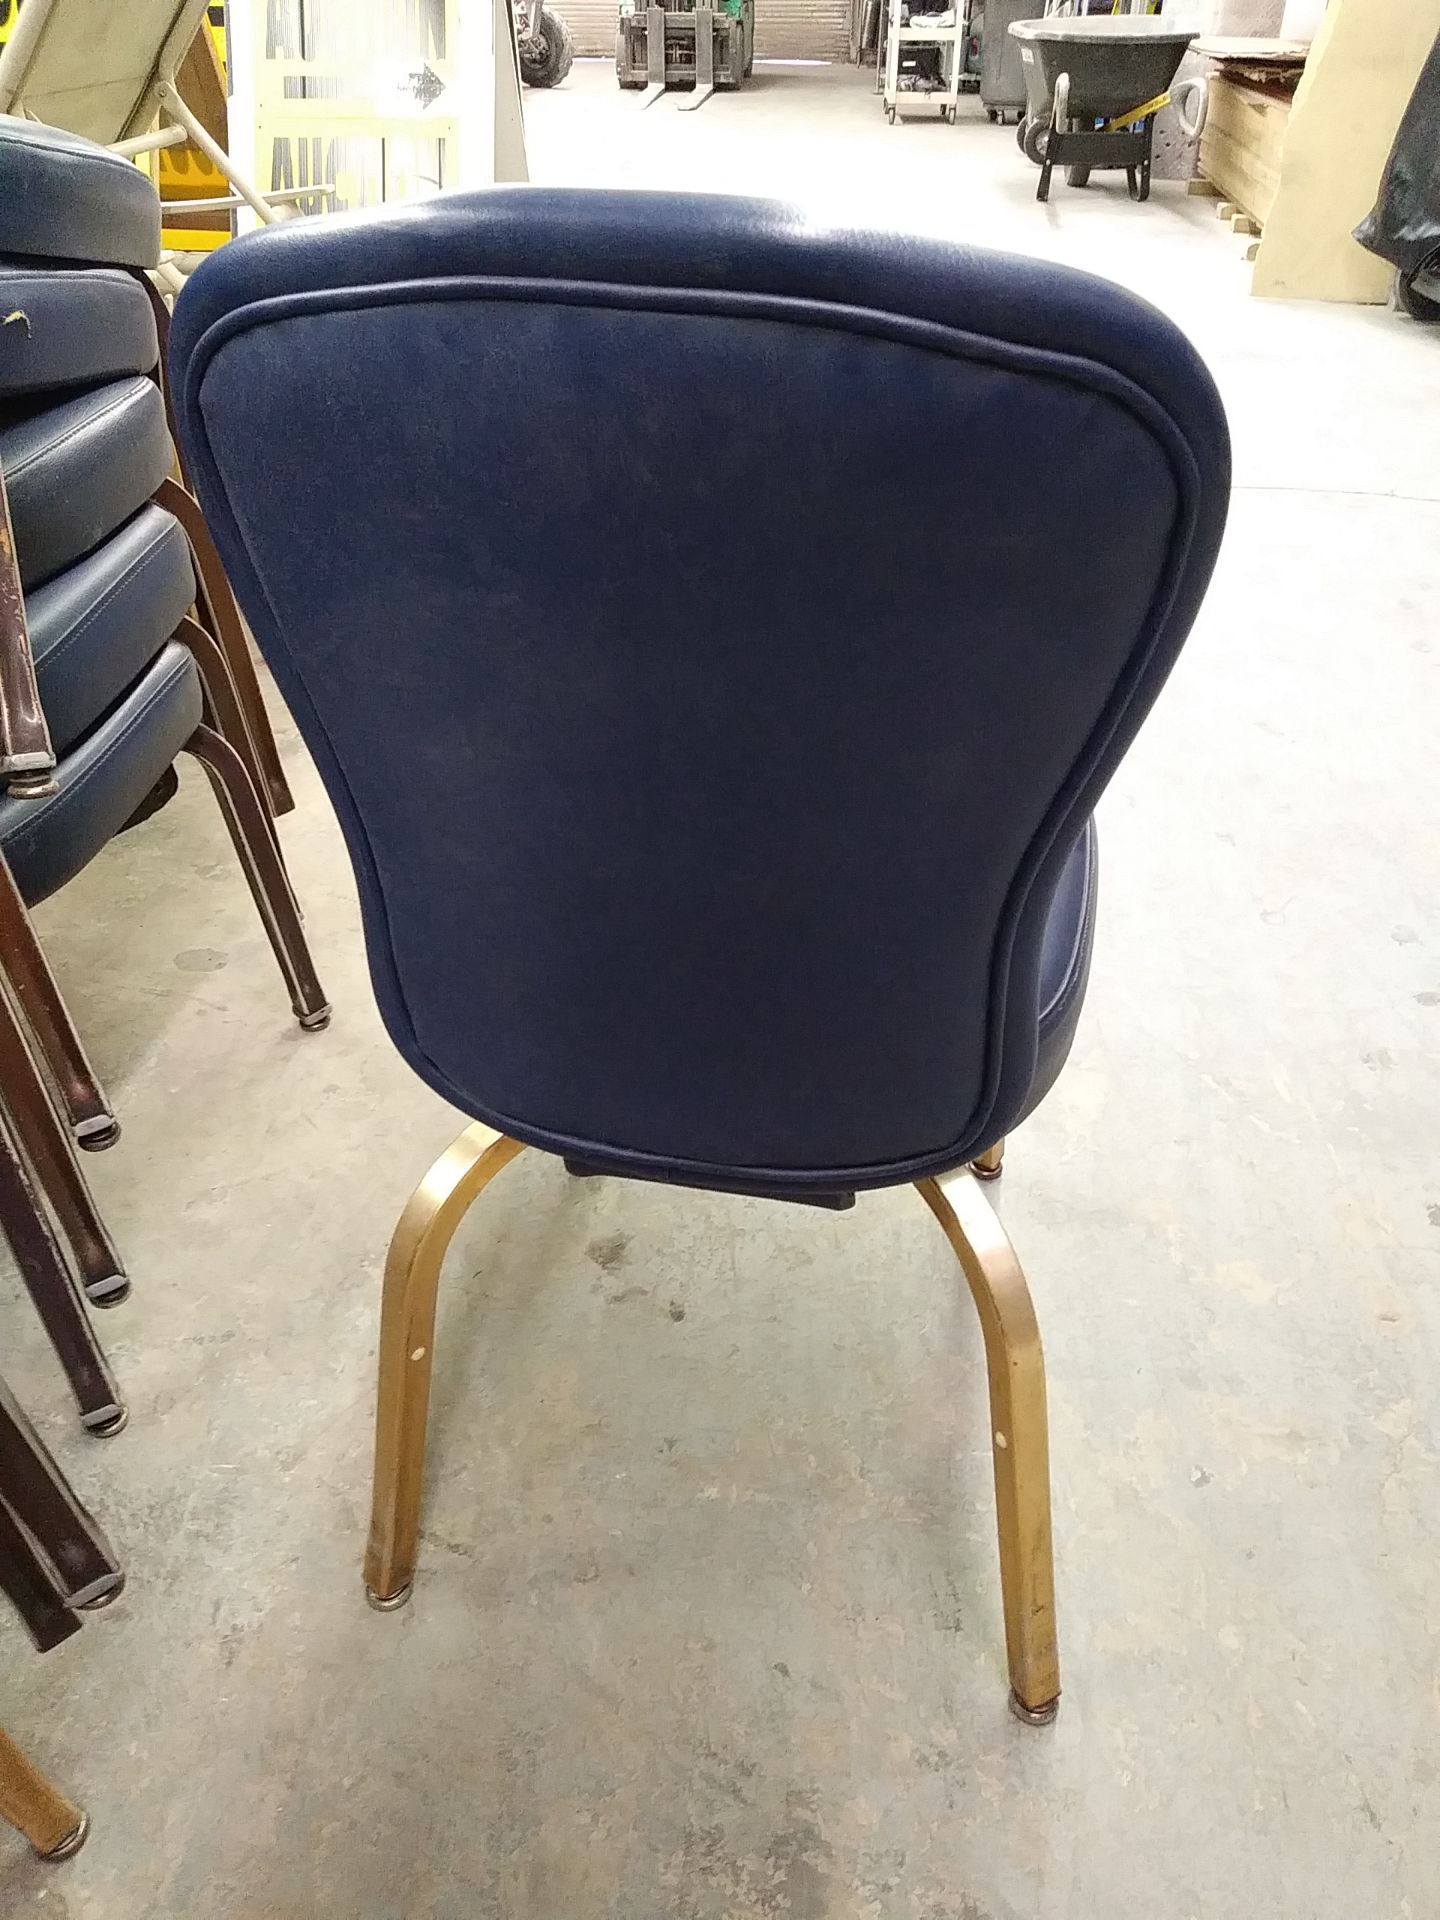 BLUE LEATHER DINING CHAIRS (X MONEY) - Image 4 of 4